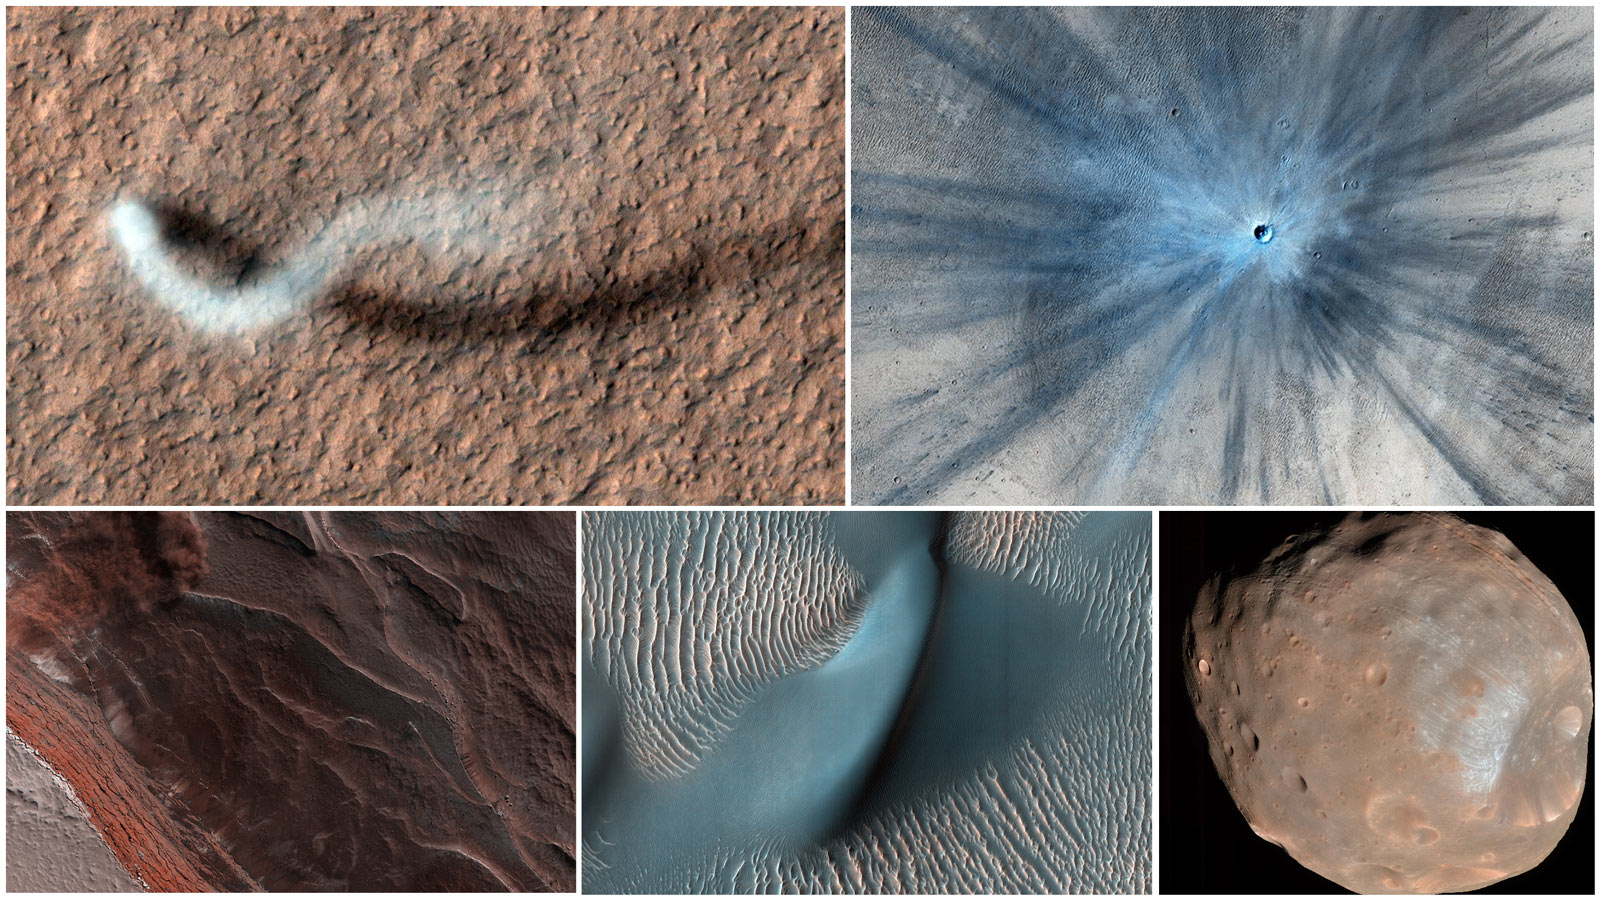 Five images taken by the HiRISE camera aboard NASA's Mars Reconnaissance Orbiter